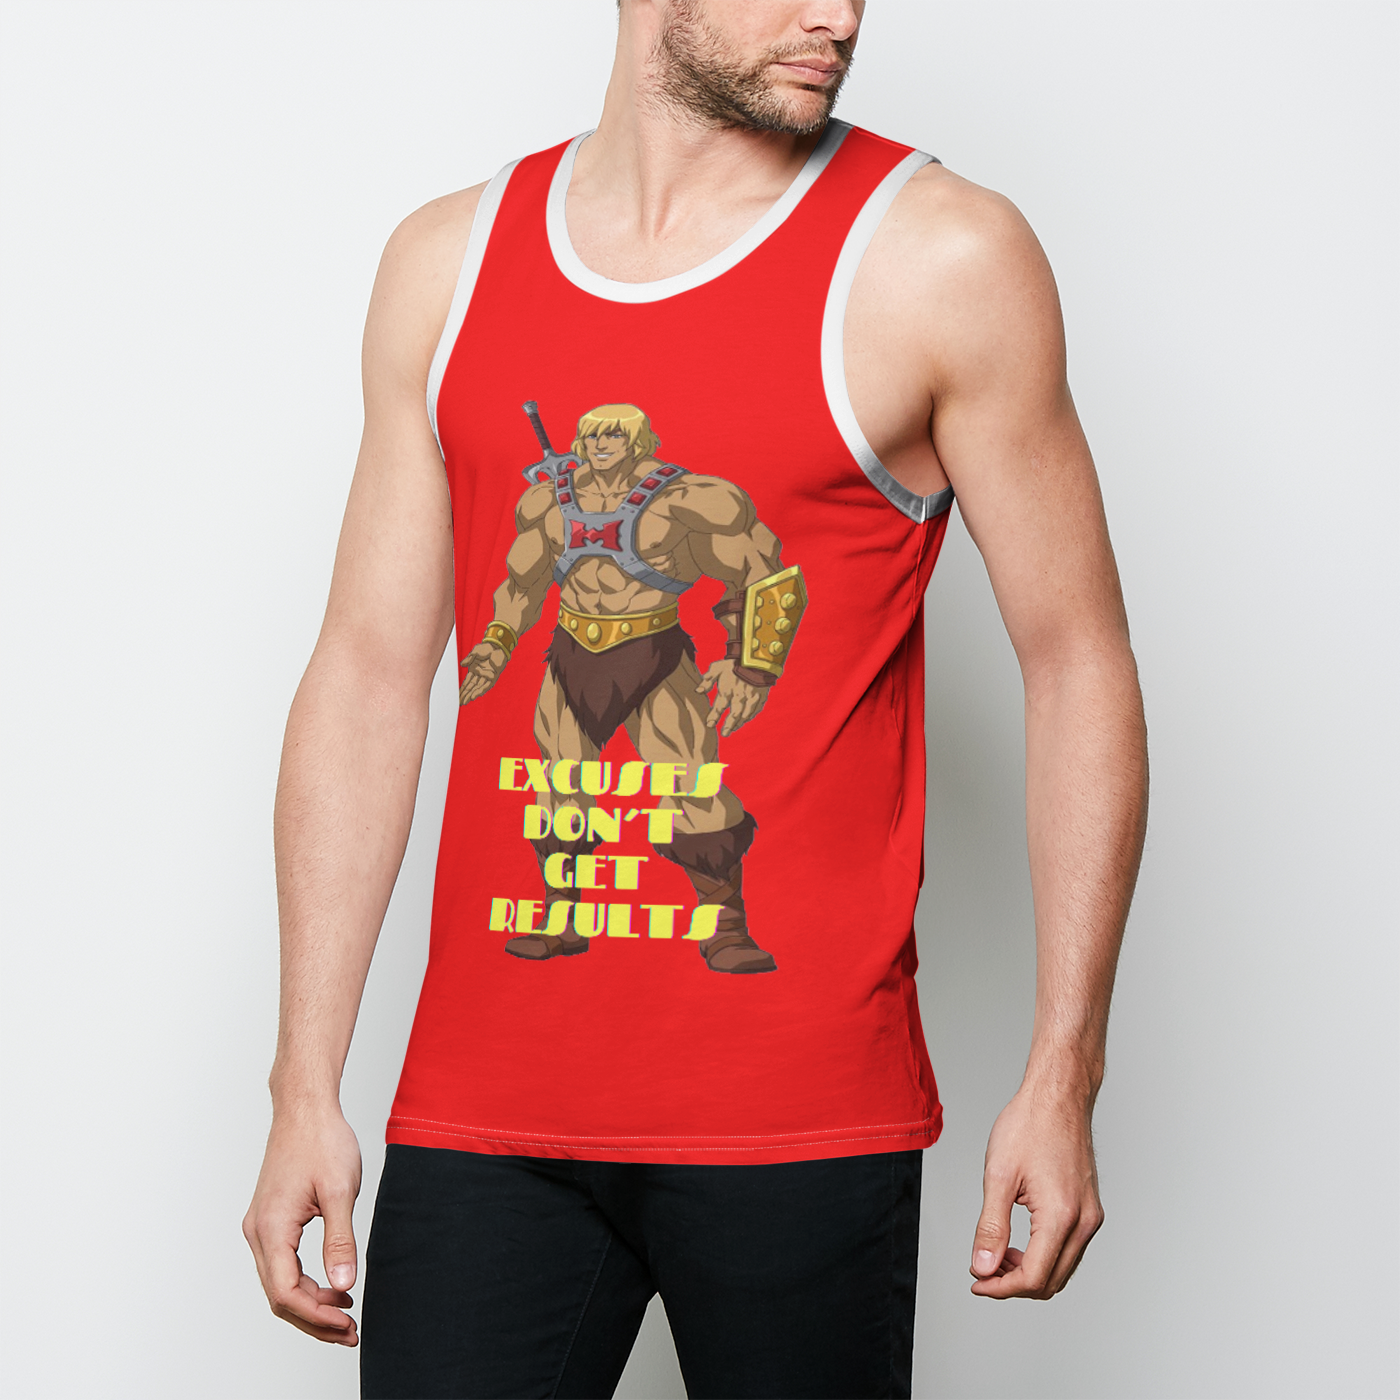 No Excuses Red Mens Tank Top